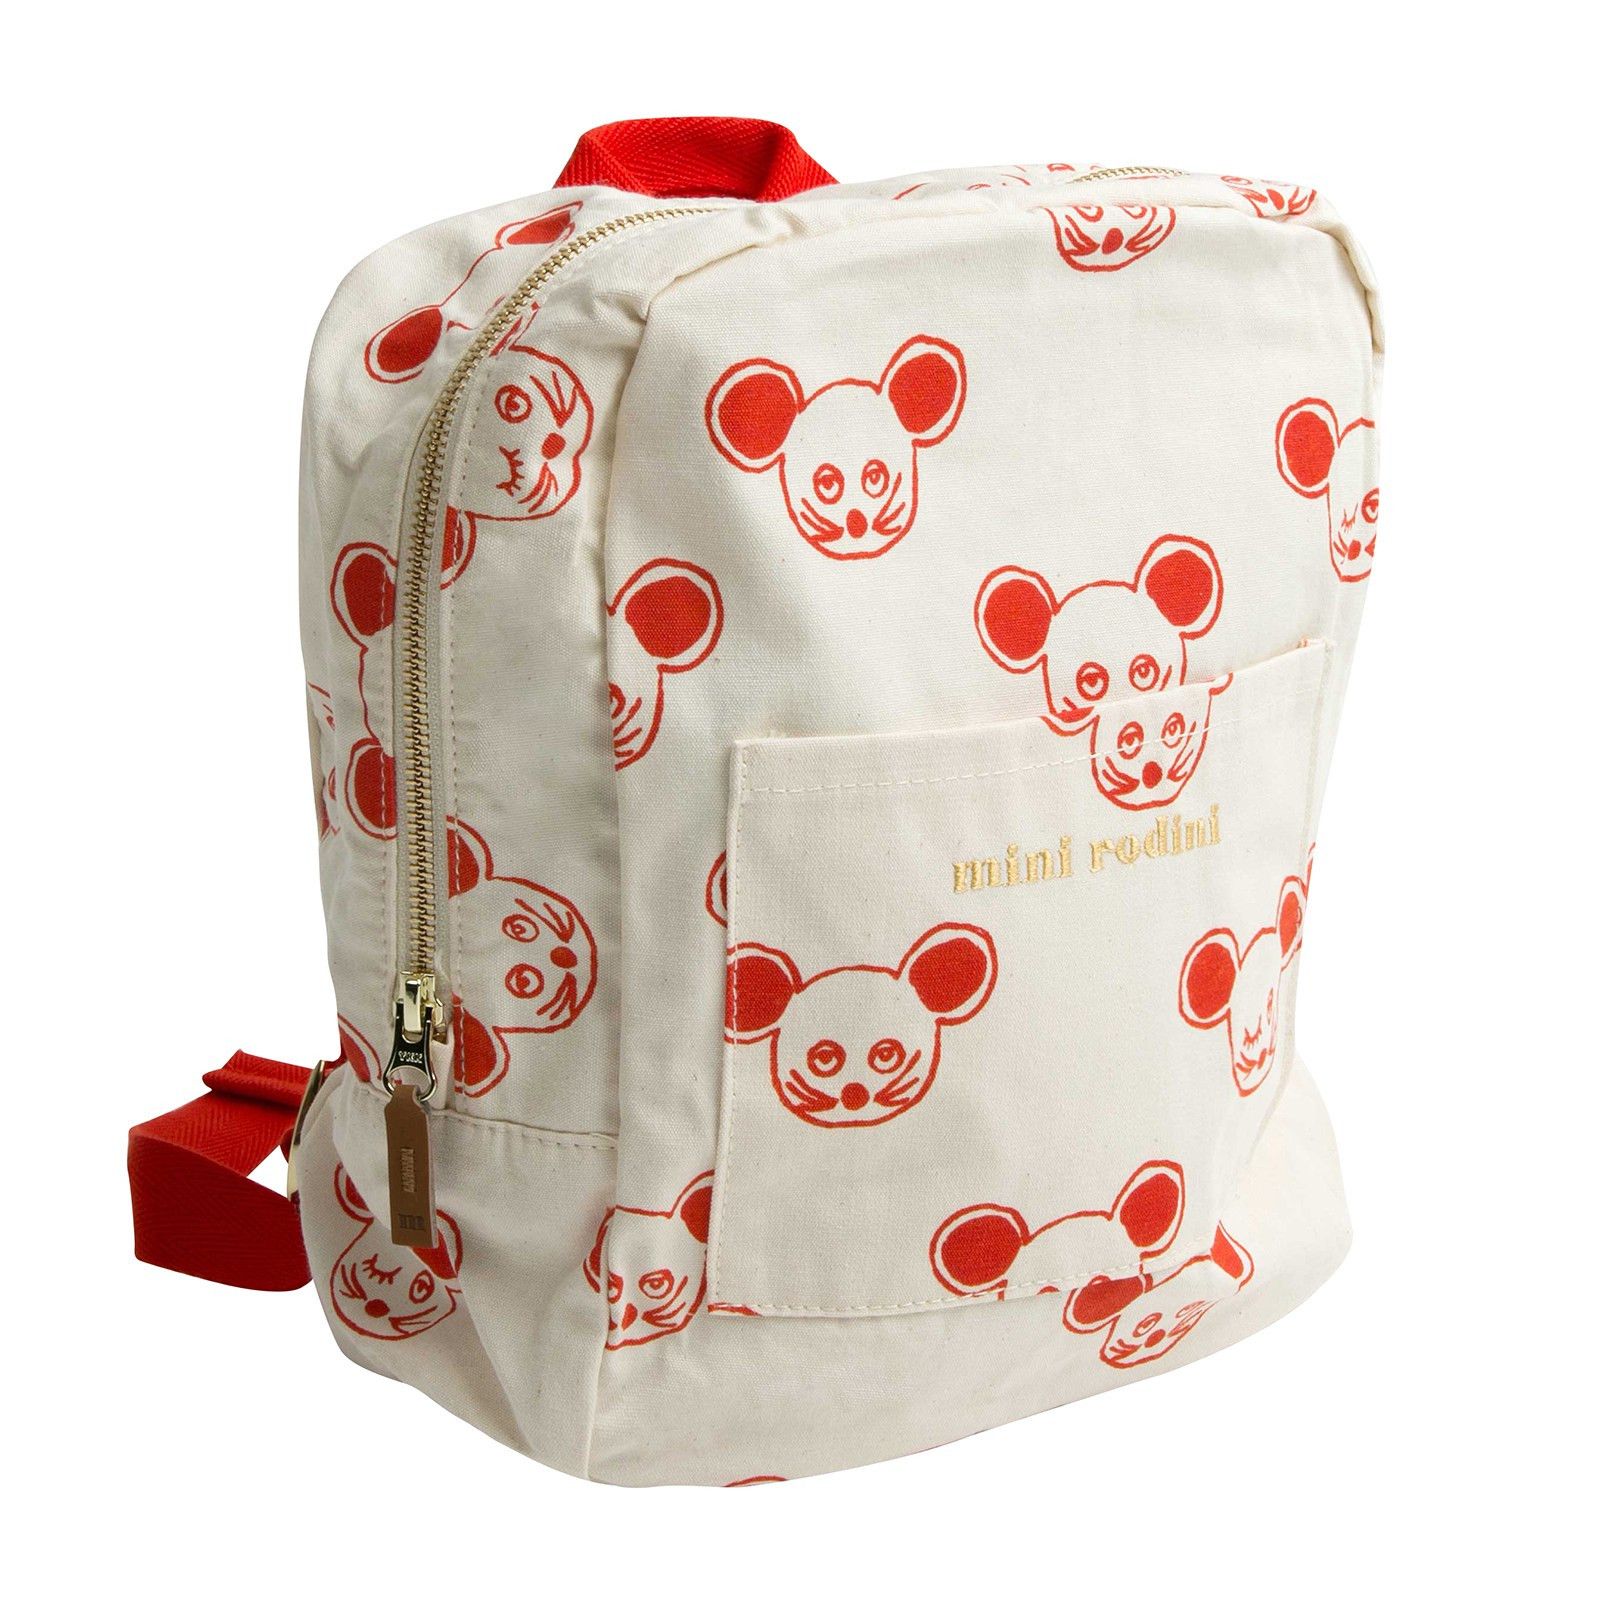 Boys&Girls White Cotton Backpack With Red Mouse Print - CÉMAROSE | Children's Fashion Store - 1